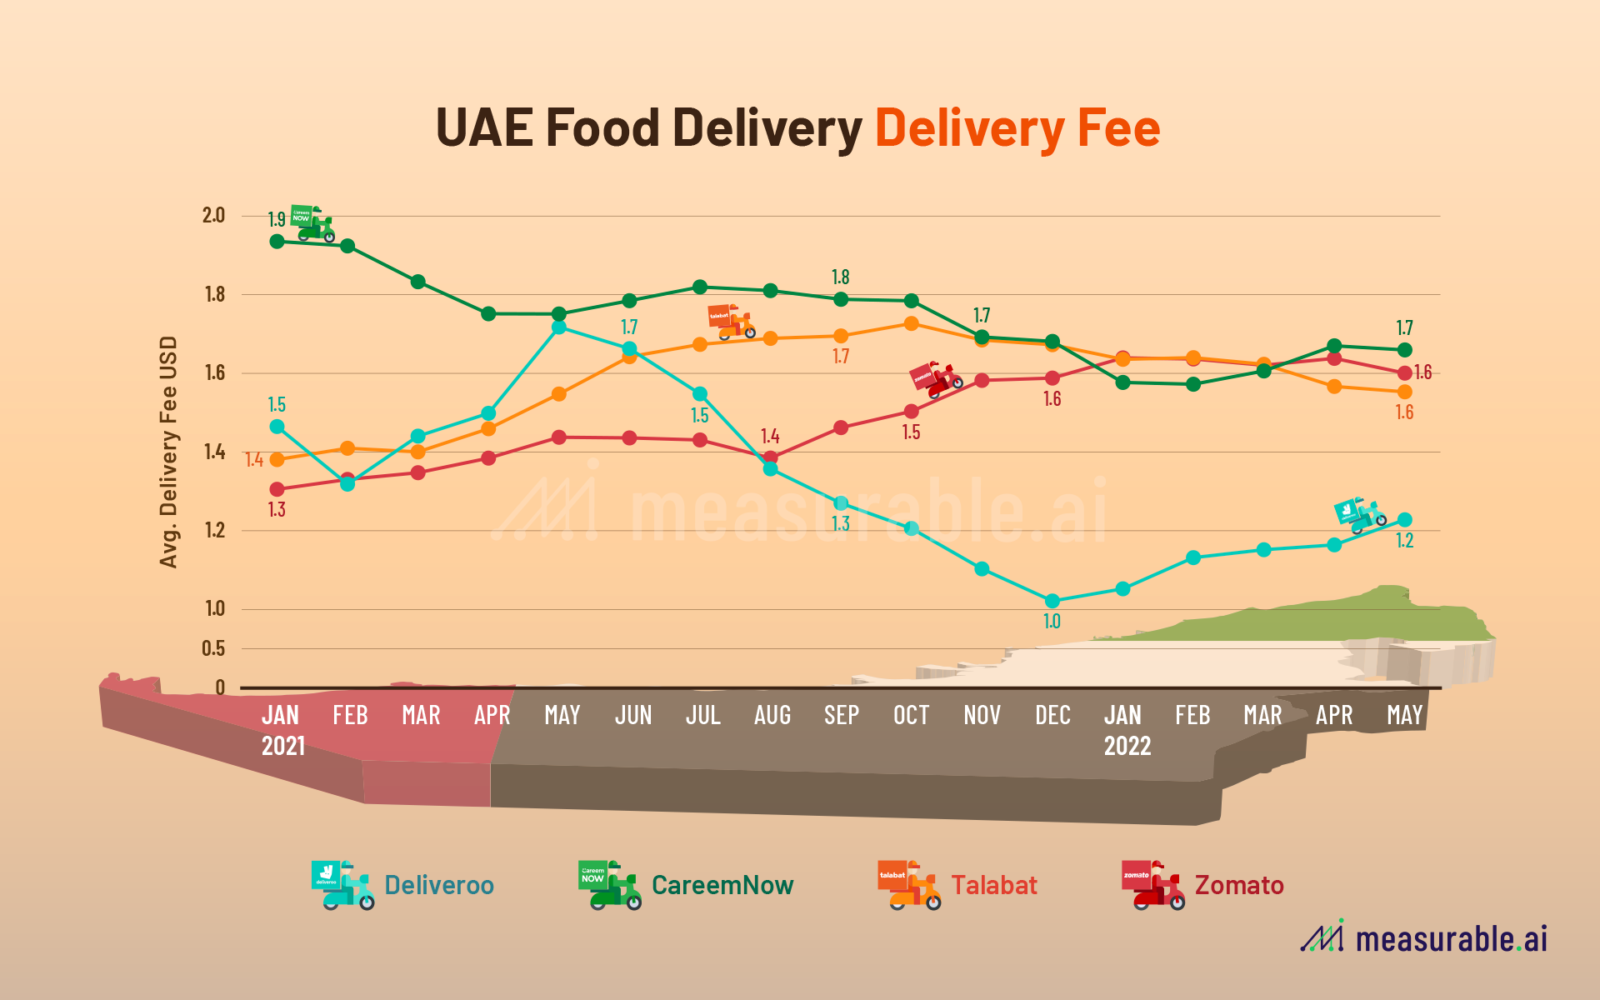 Food Delivery Fees in the UAE Amongst the Major Players 